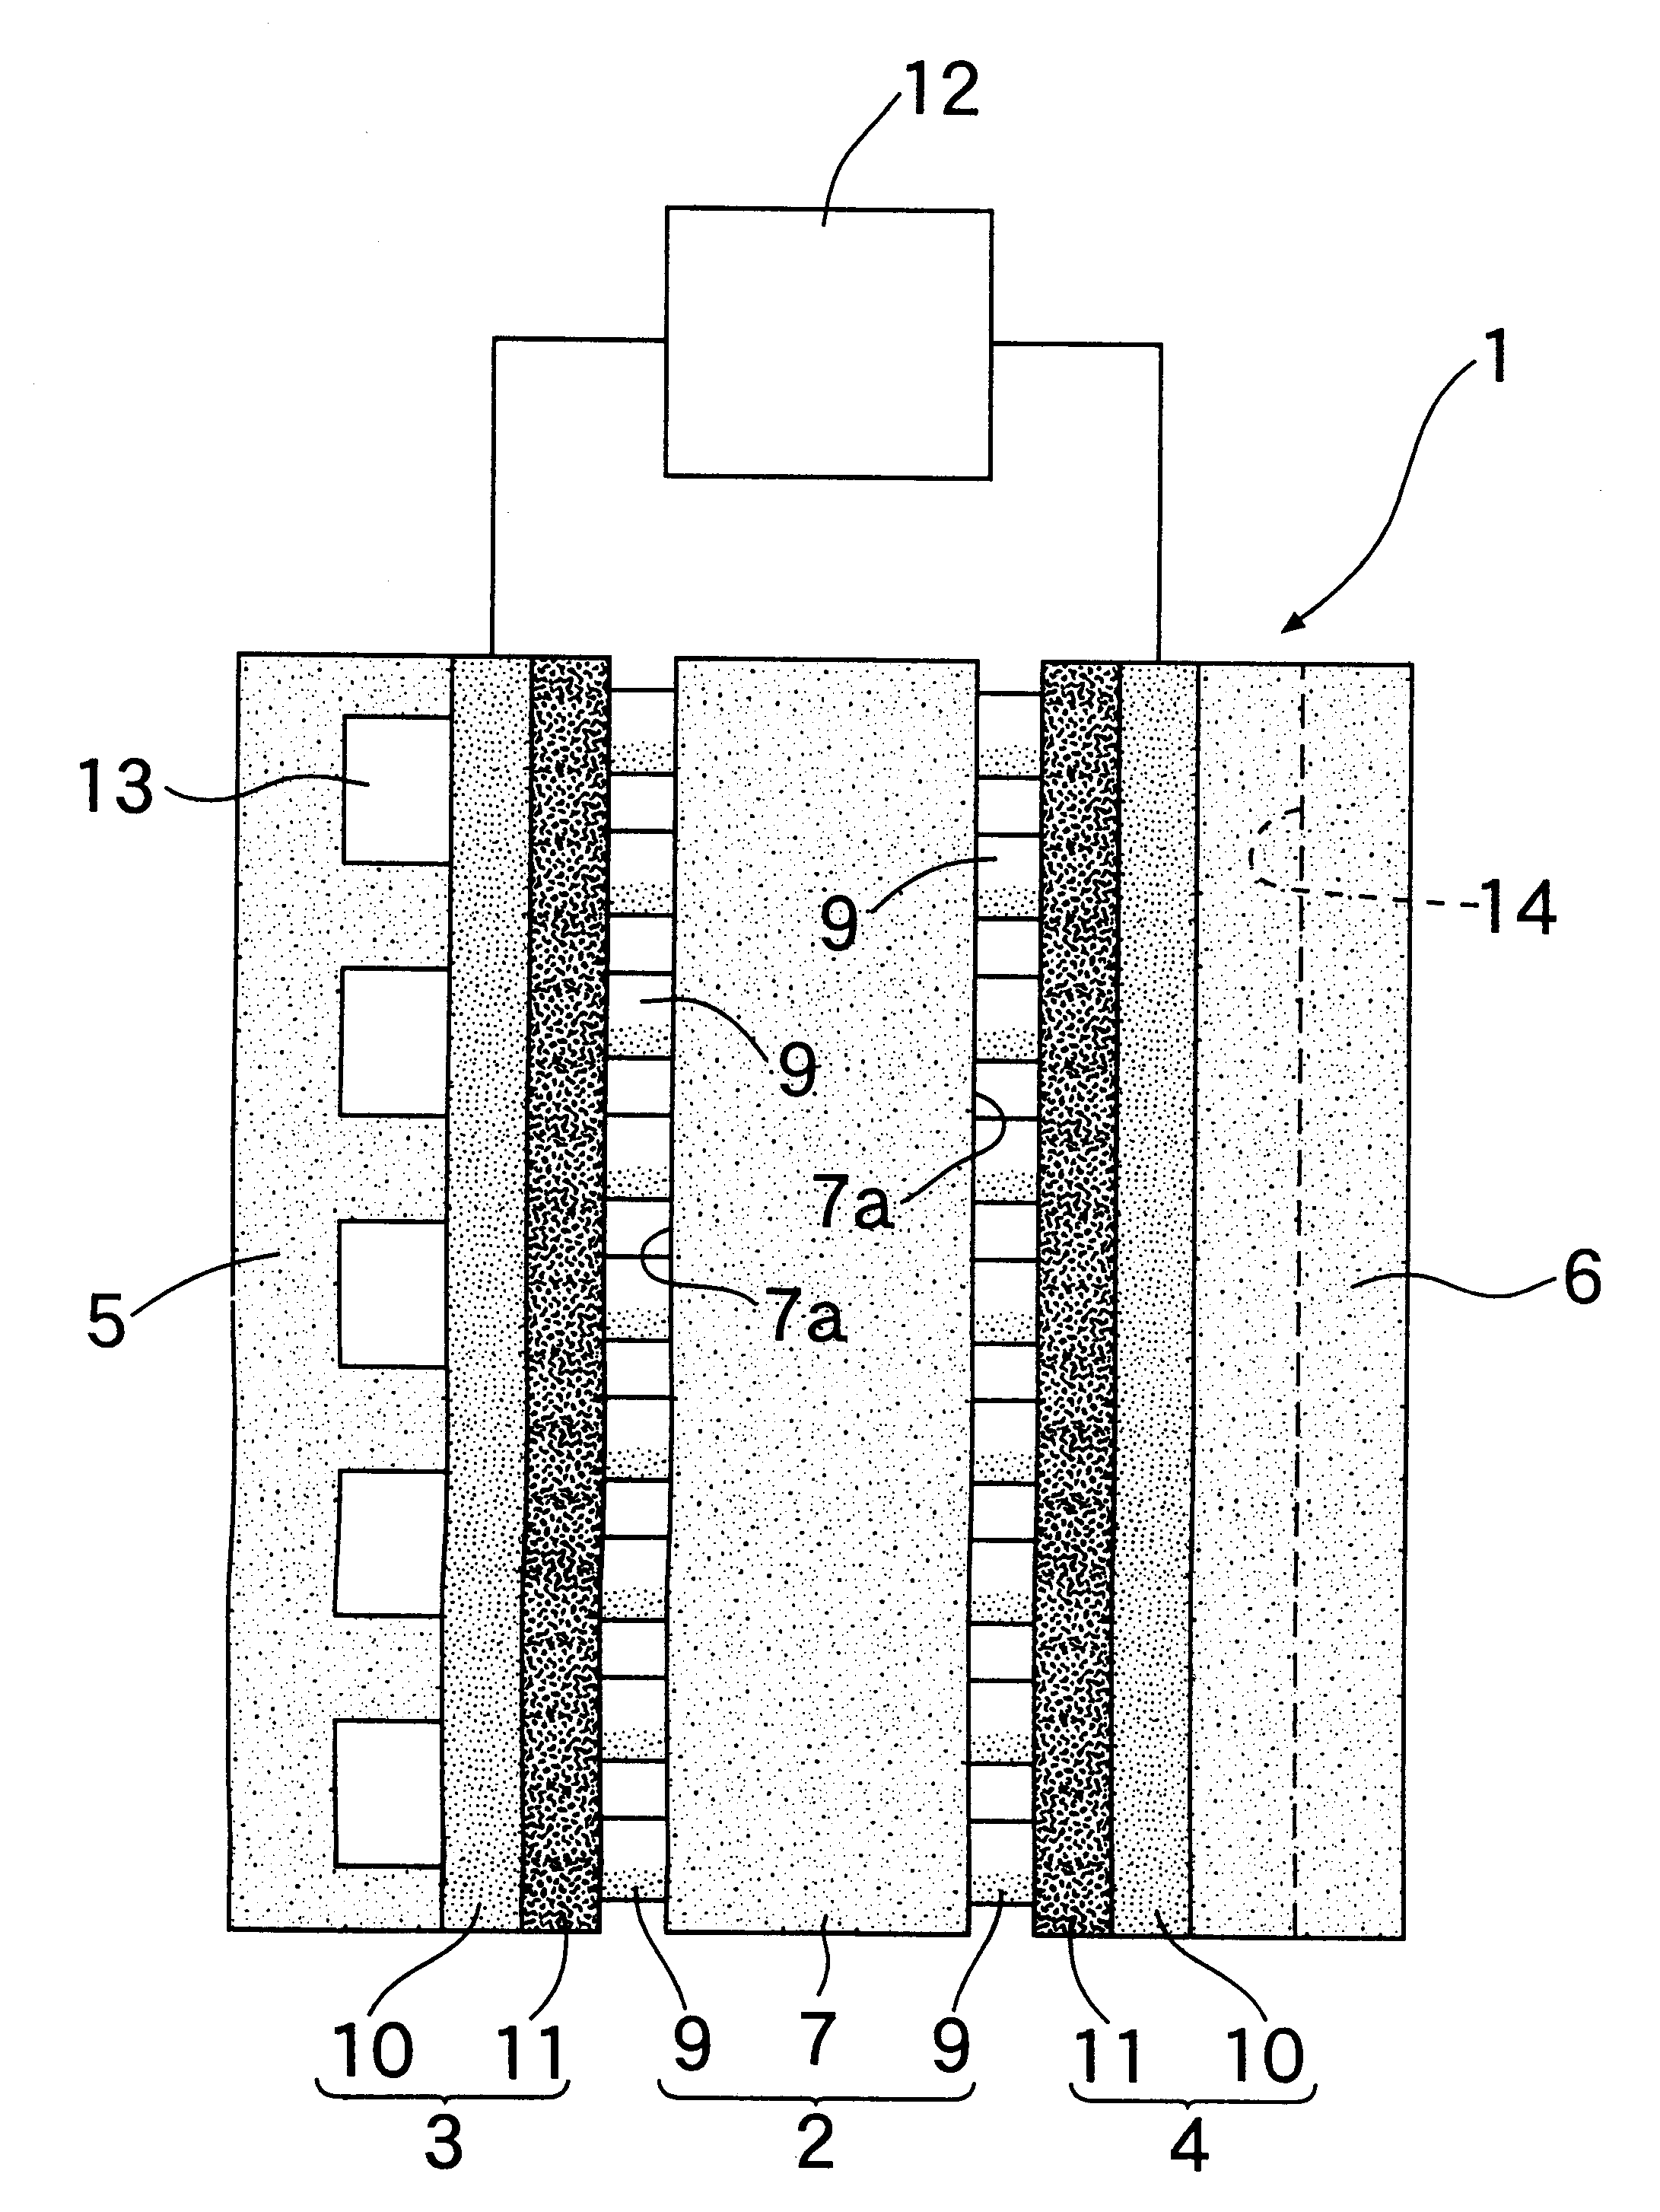 Active solid polymer electrolyte membrane in solid polymer type fuel cell and process for the production thereof